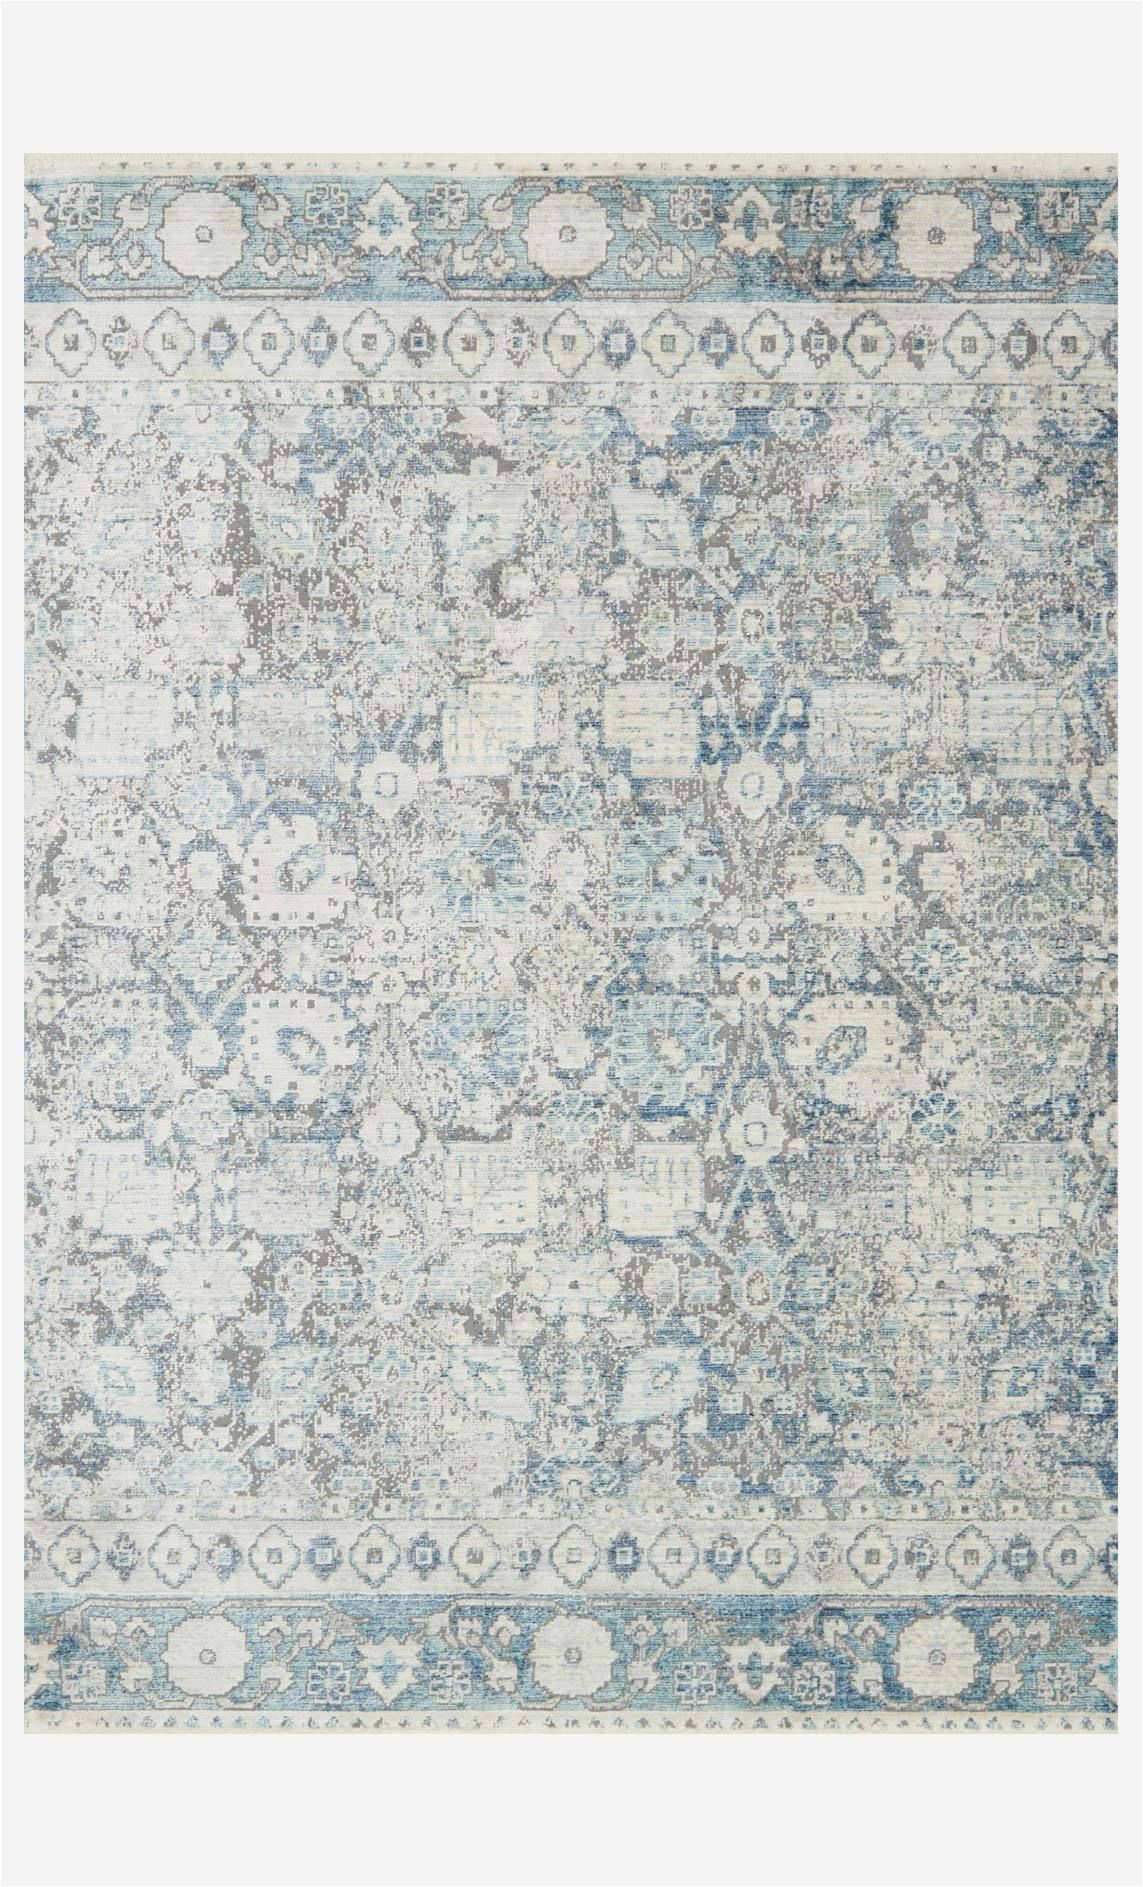 Magnolia Rugs Bed Bath and Beyond Oe 02 Mh Grey Sky Loloi Rugs Magnolia Home Rugs